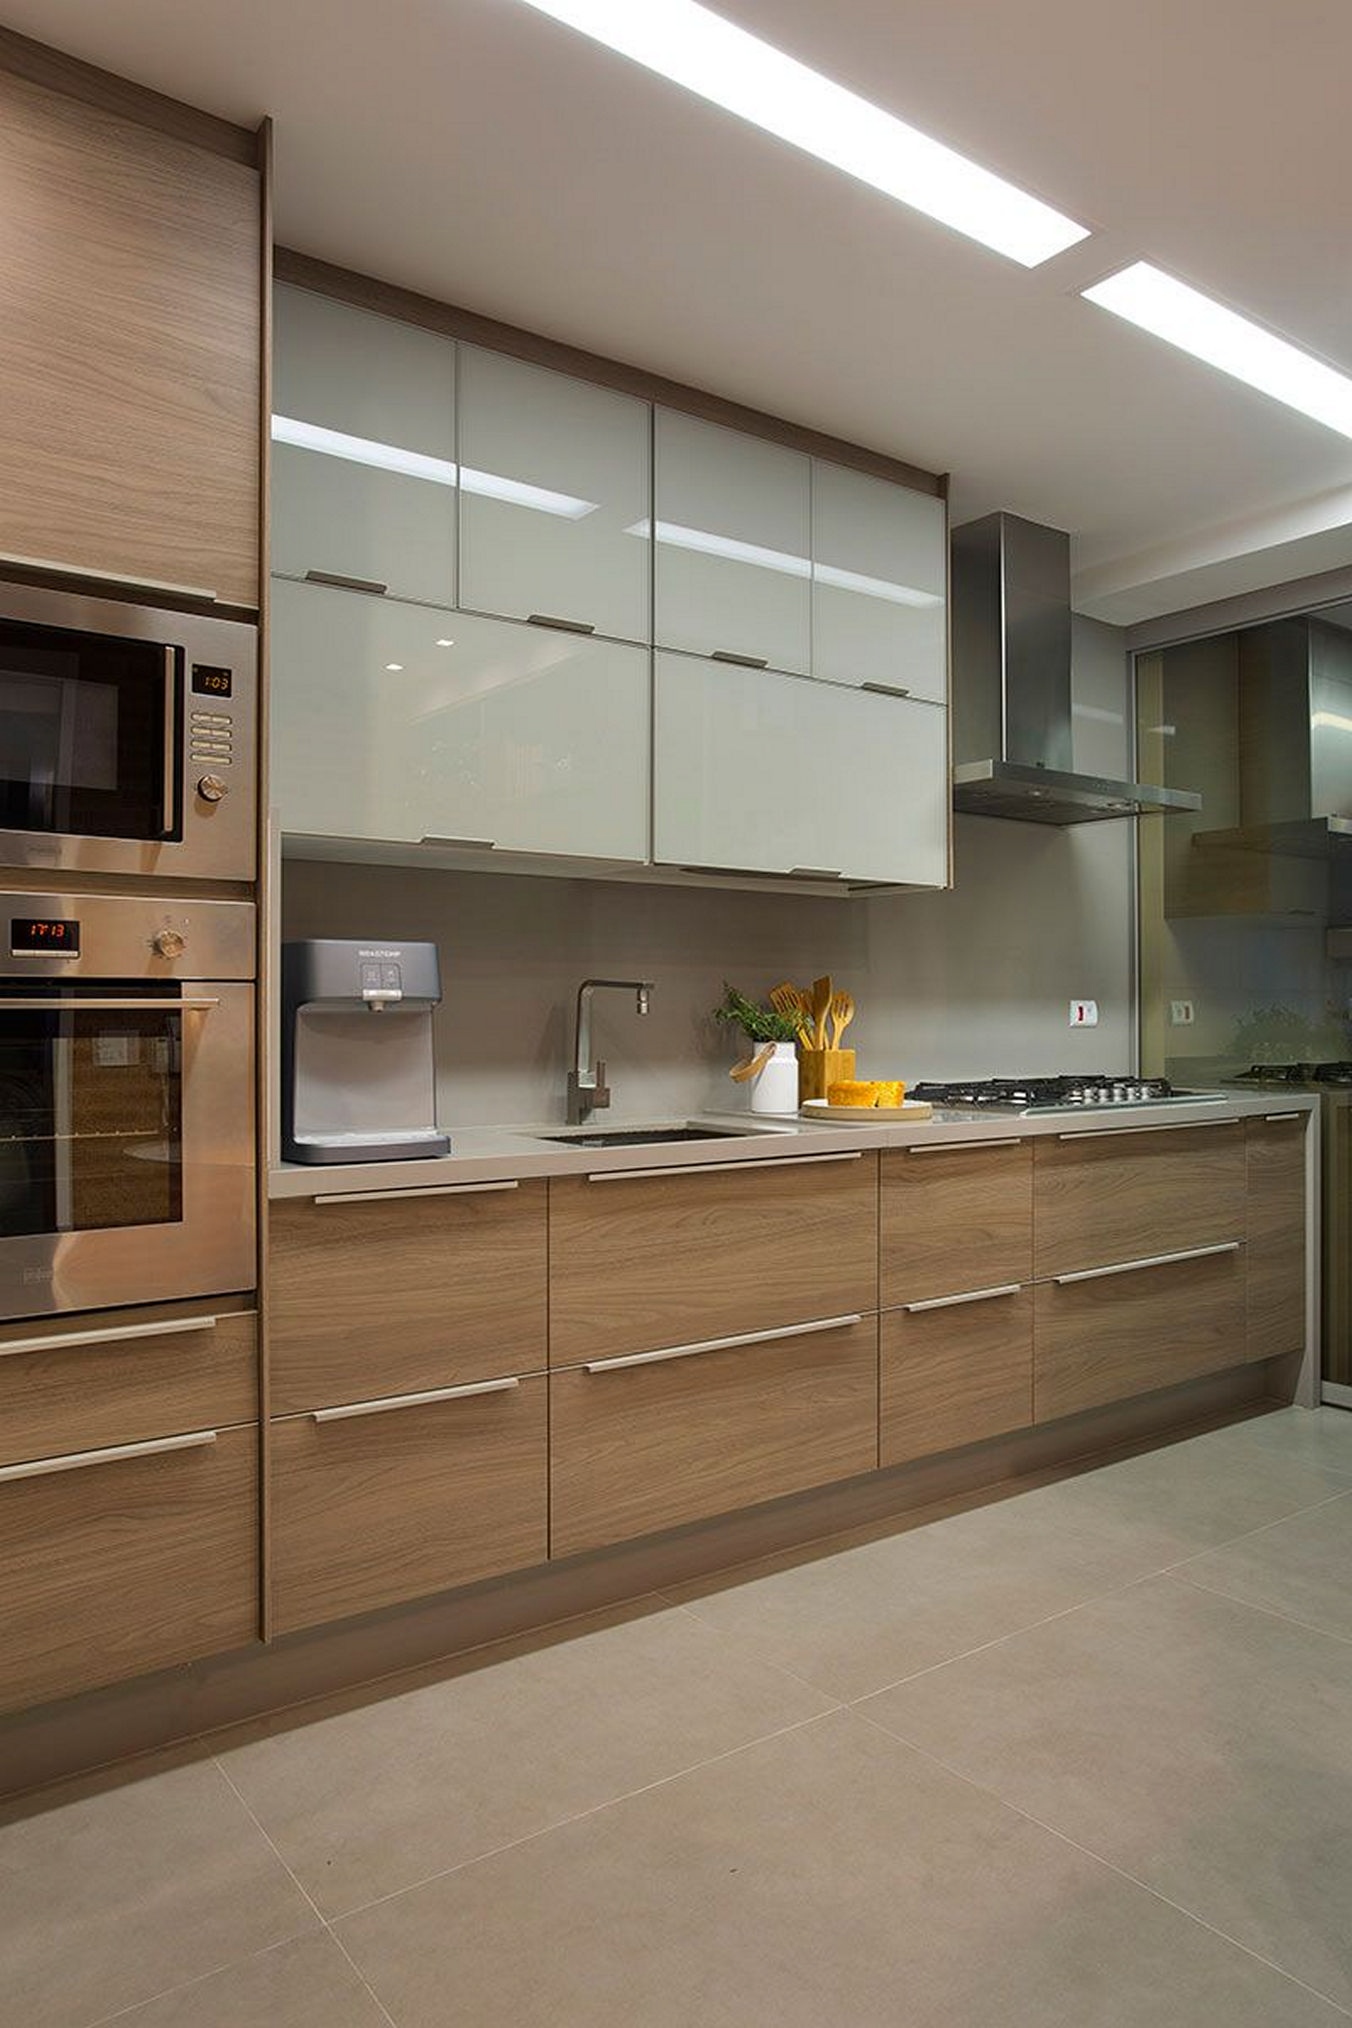 On-trend modern kitchen design and remodeling to keep in mind when planning a kitchen renovation 1